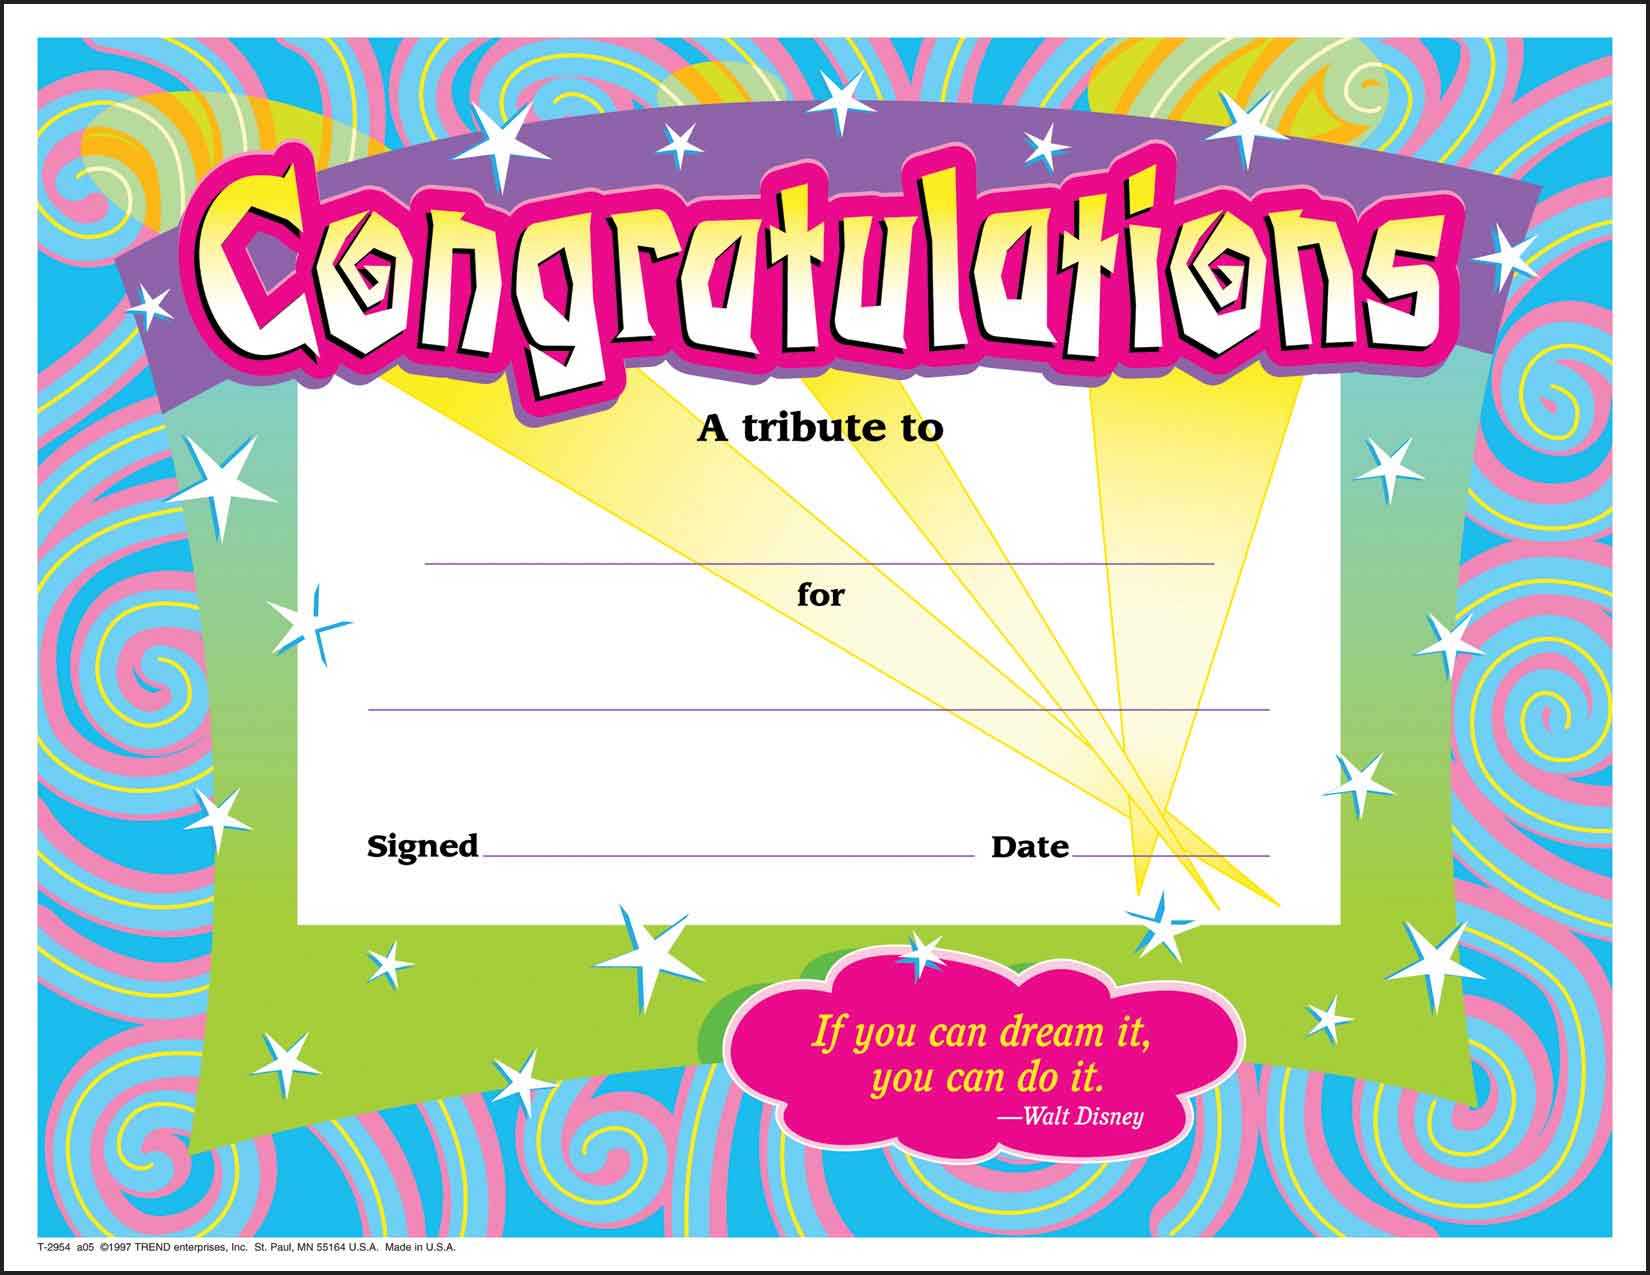 30 Congratulations Awards (Large) Swirl Certificate Pack Throughout Free Printable Funny Certificate Templates